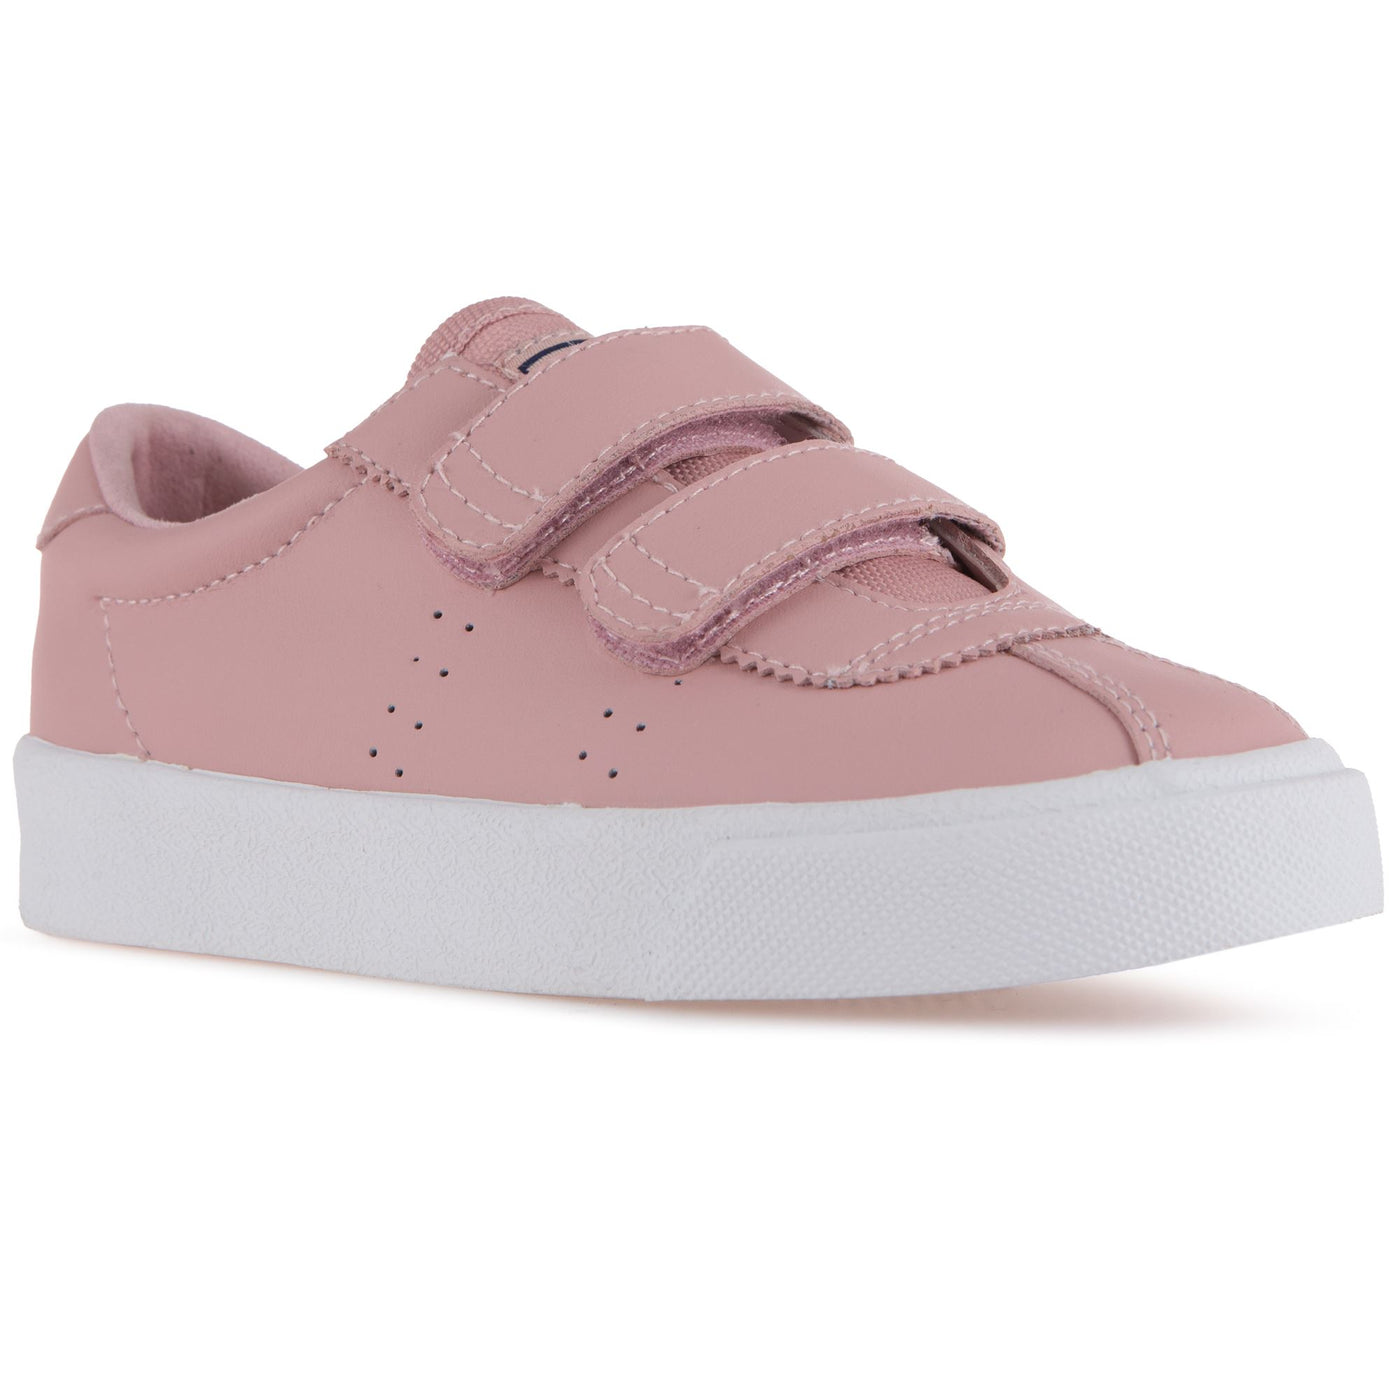 Sneakers Kid unisex 2843 KIDS CLUB S STRAPS ACTION LEATHER Low Cut PINK SMOKE Detail Double				